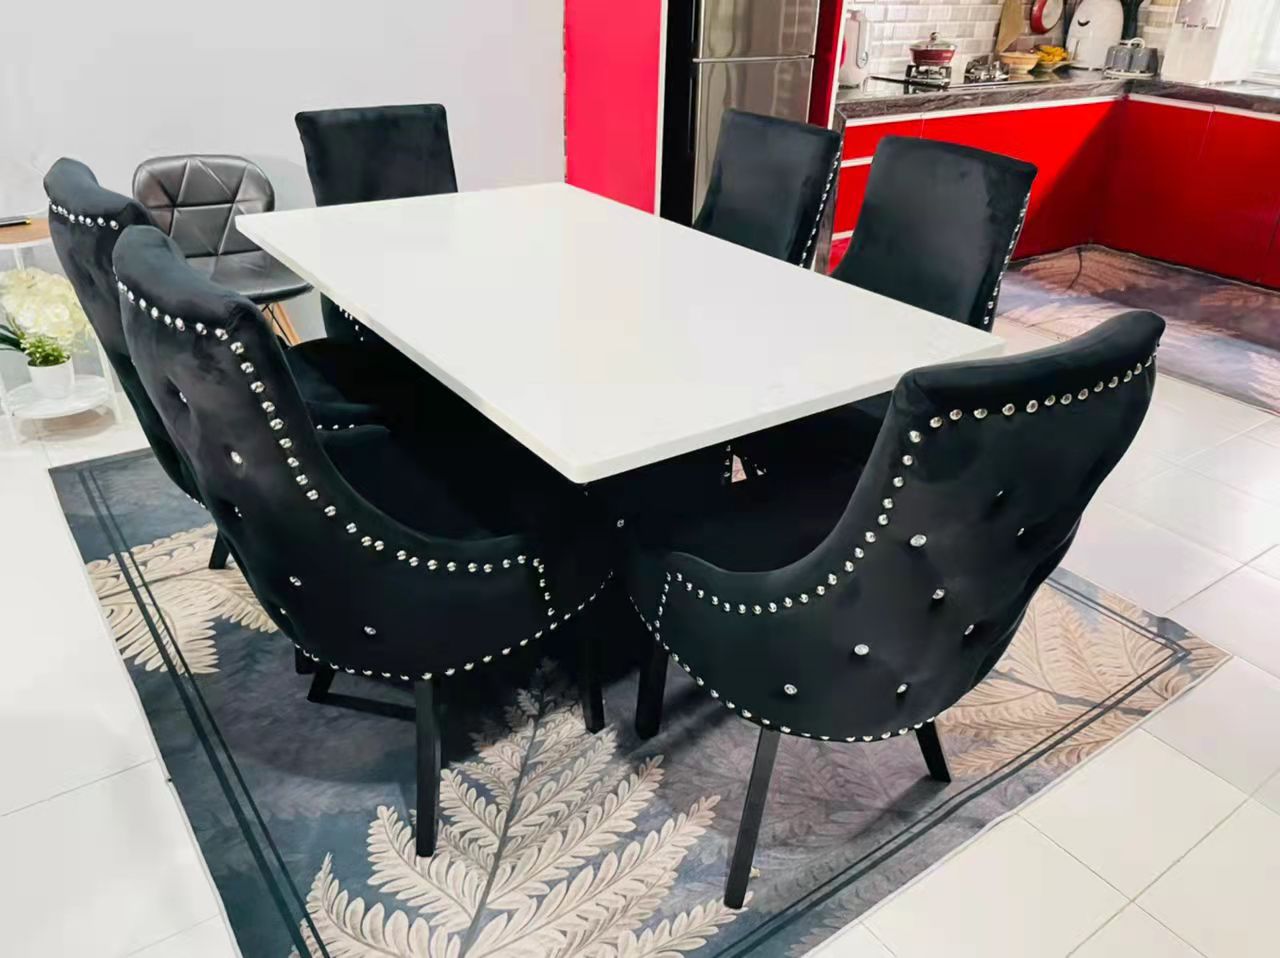 TITAN 𝐌𝐞𝐣𝐚 𝐌𝐚𝐤𝐚𝐧 Marble Dining Table Table Set 6 seaters / 8 seaters / Free Shipping | Shopee Malaysia